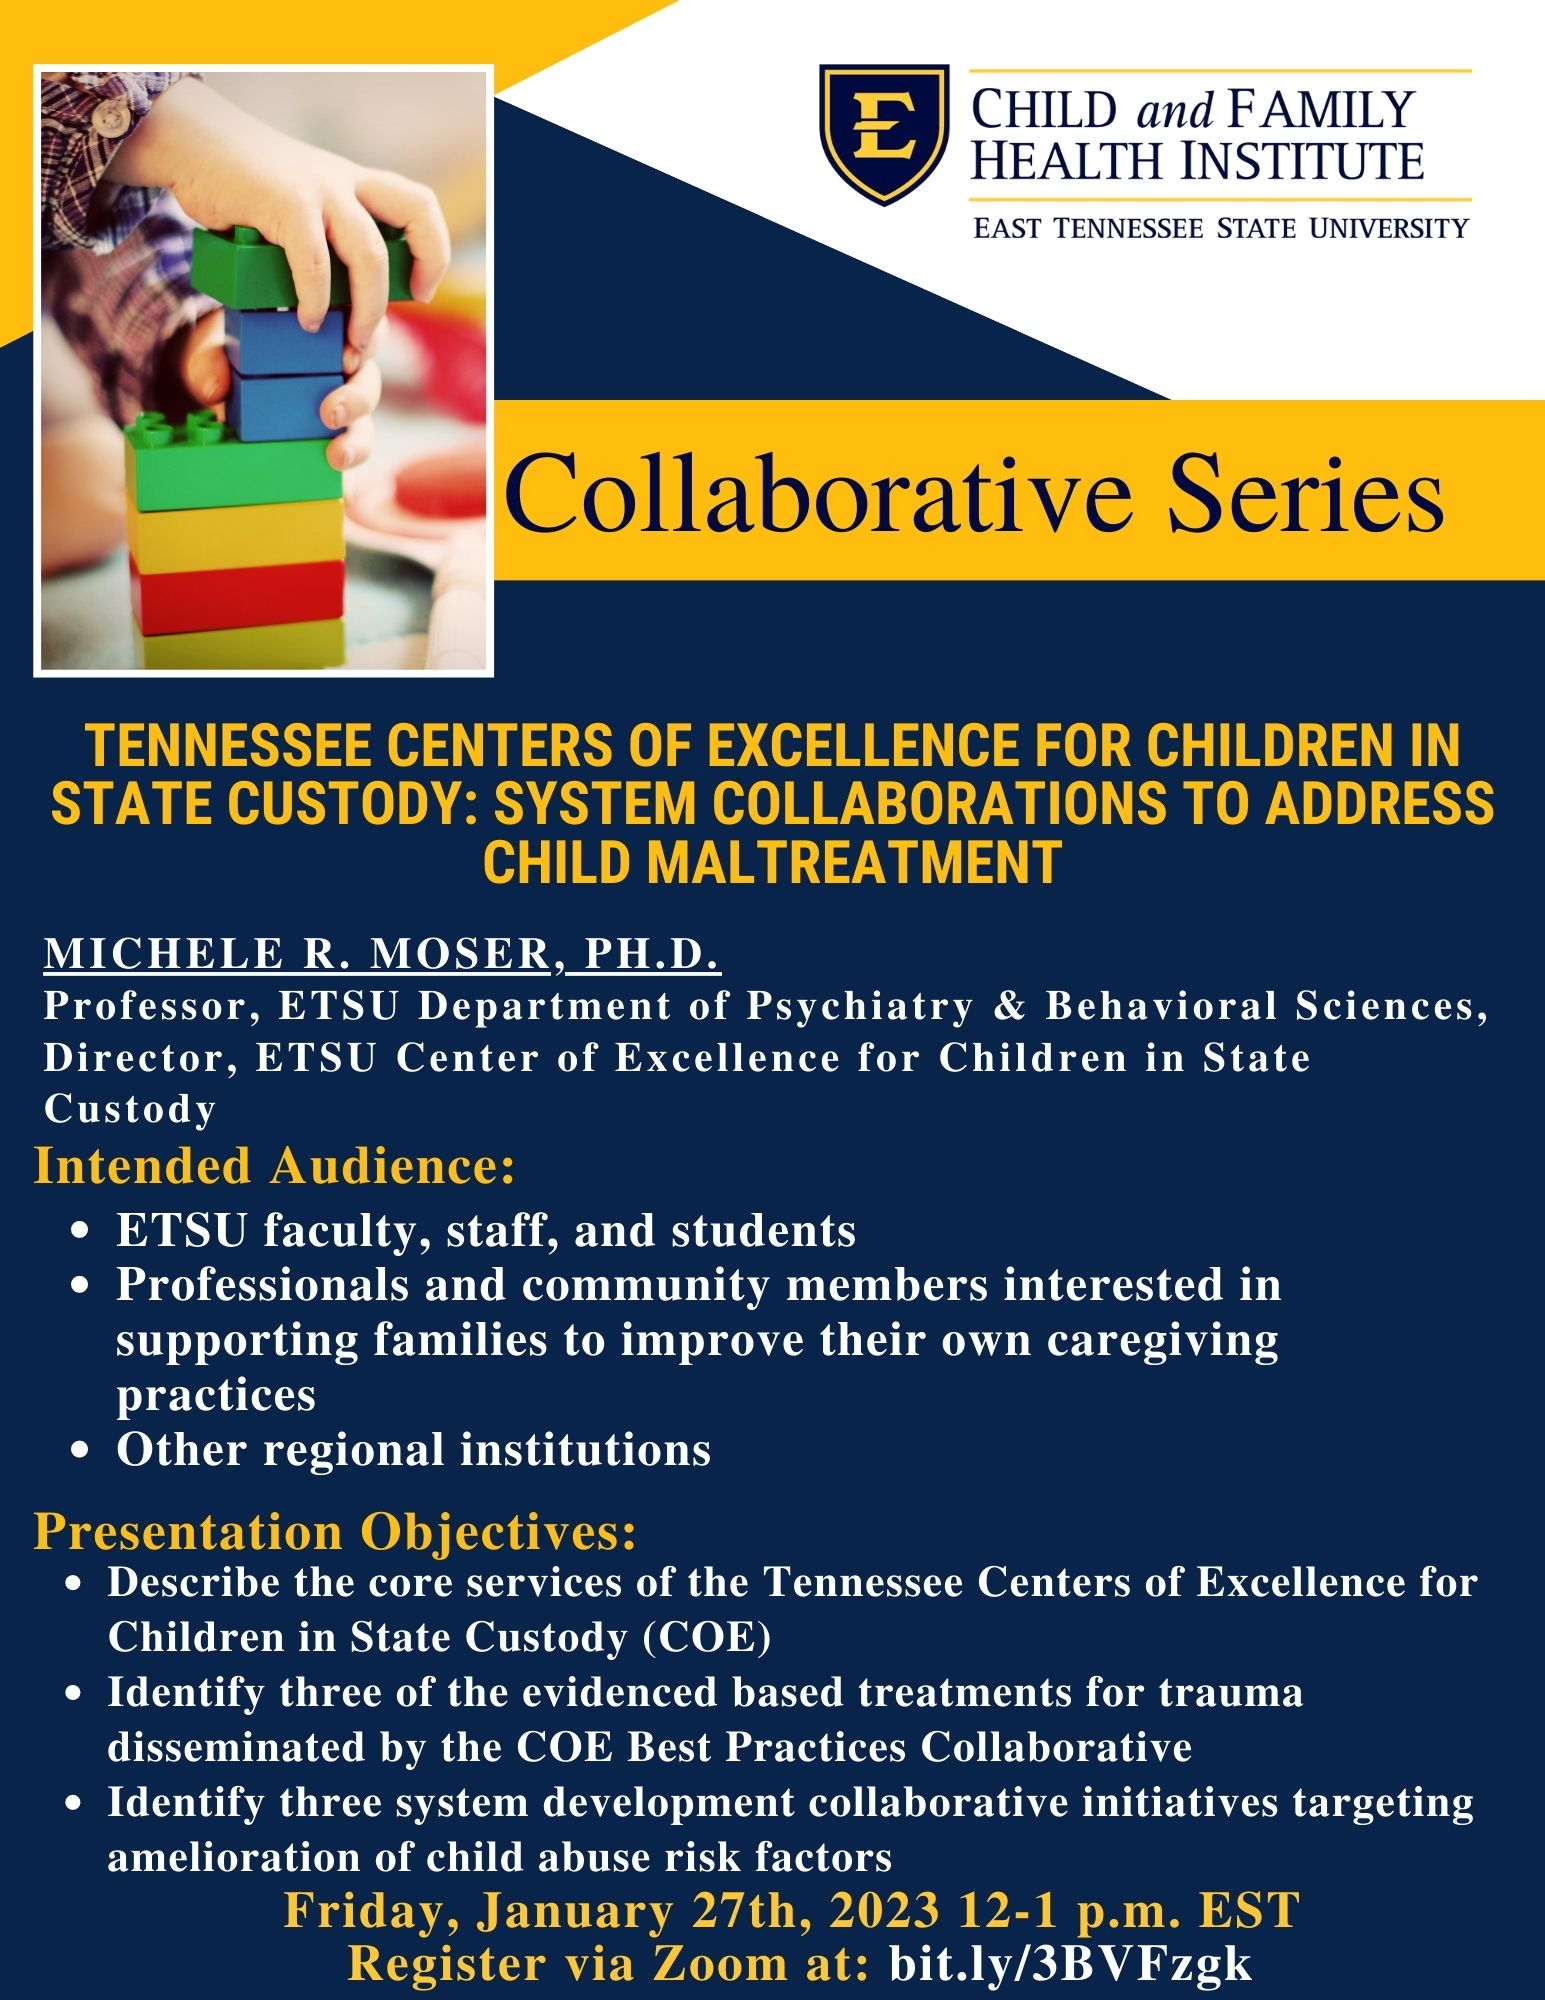 CFHI Collaborative Series - Tennessee Centers of Excellence for Children in State Custody: System Collaborations to Address Child Maltreatment - Michele R. Moser, PhD Banner